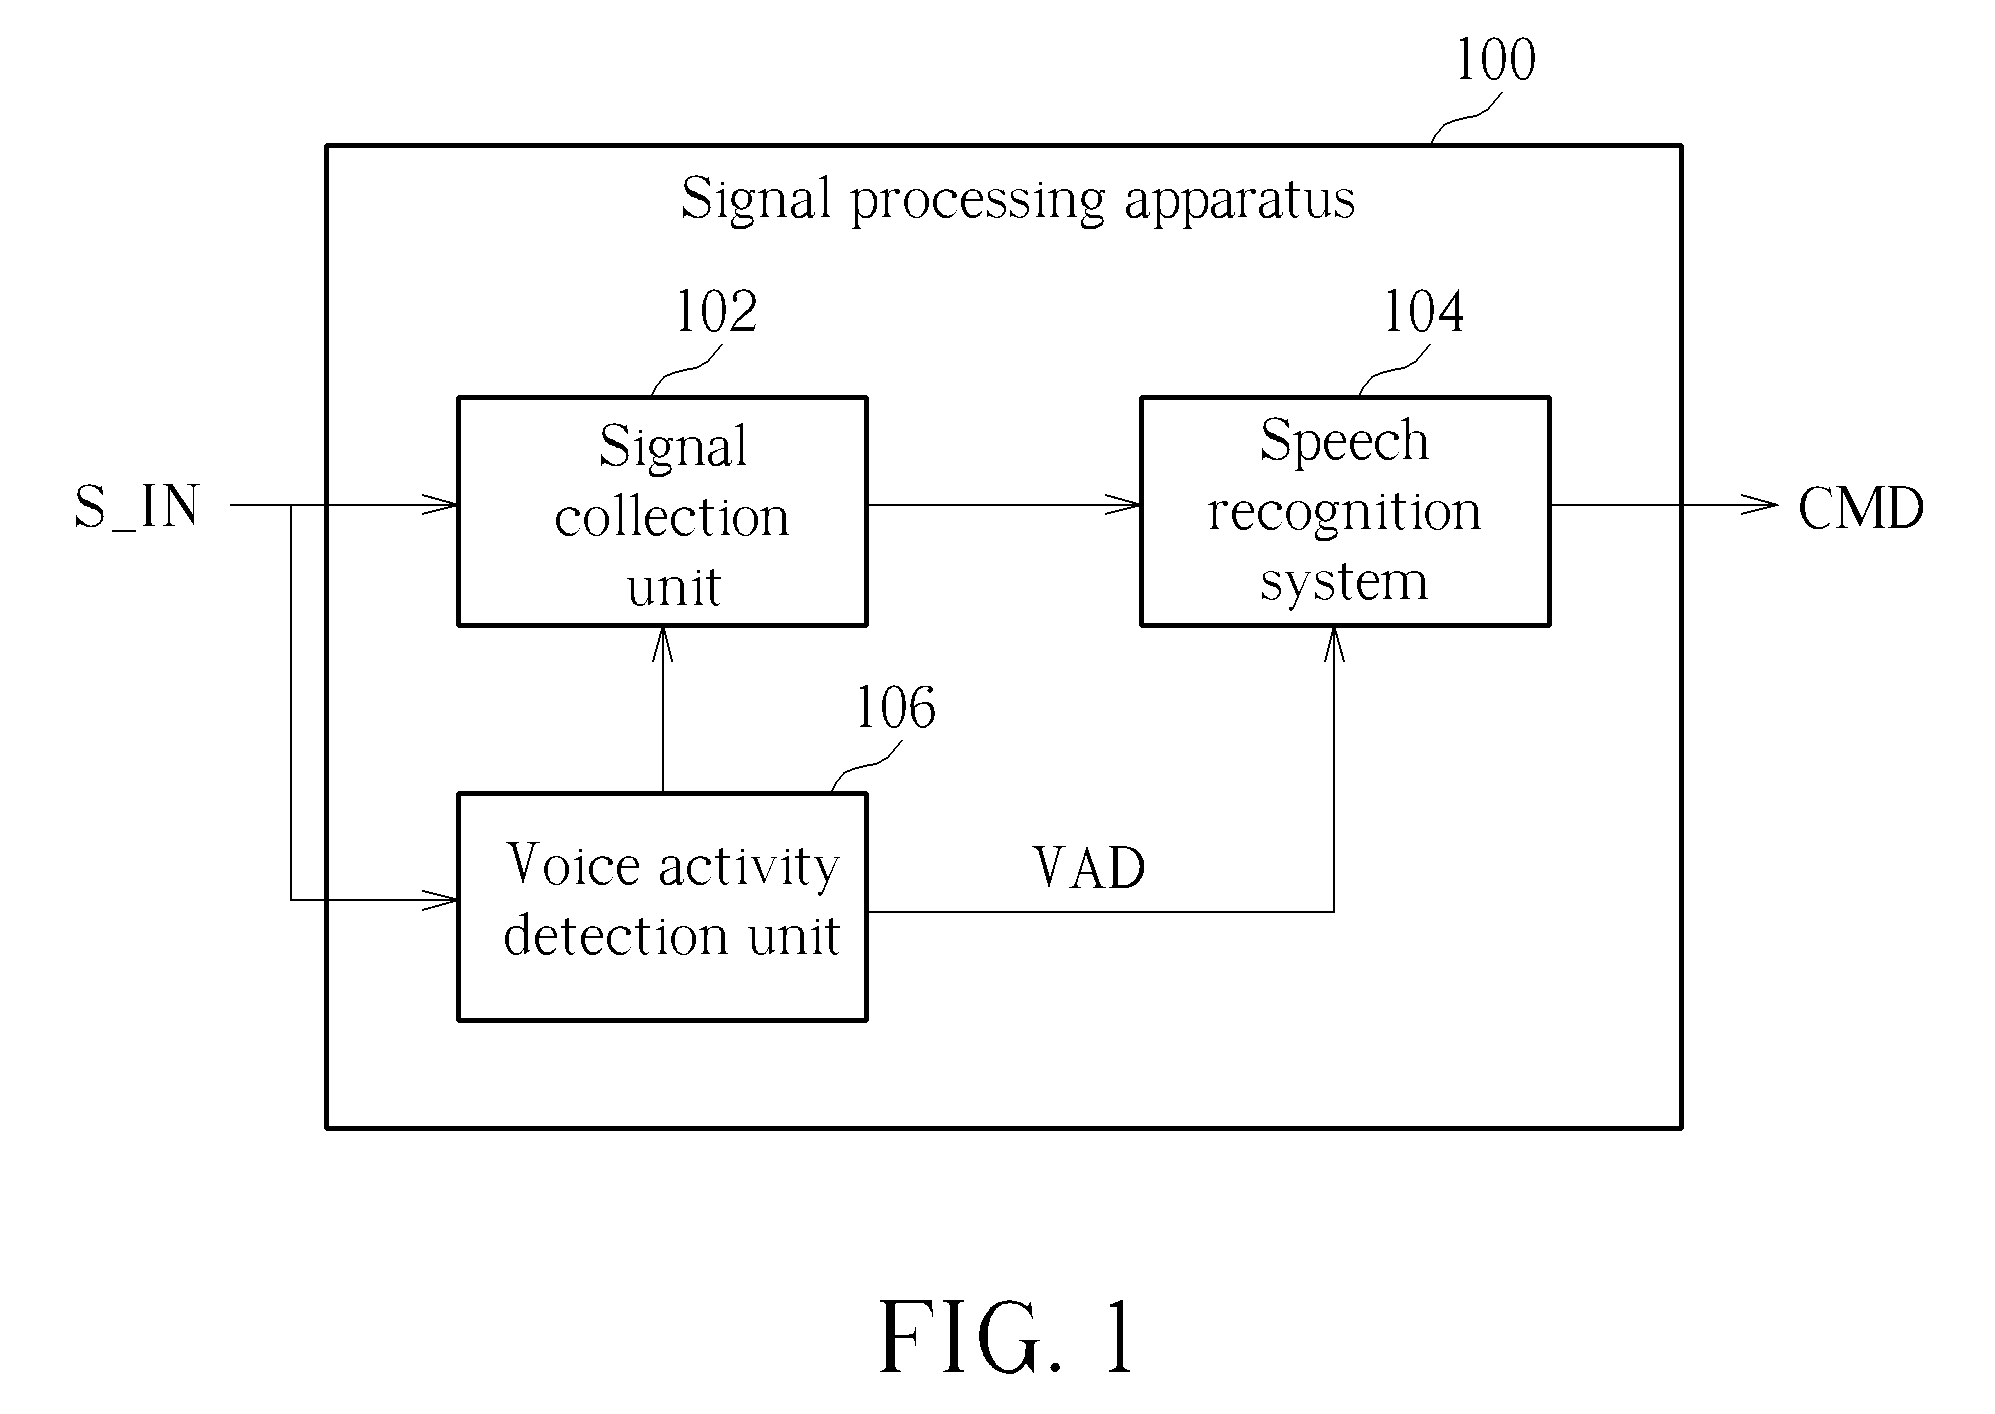 Signal processing apparatus having voice activity detection unit and related signal processing methods